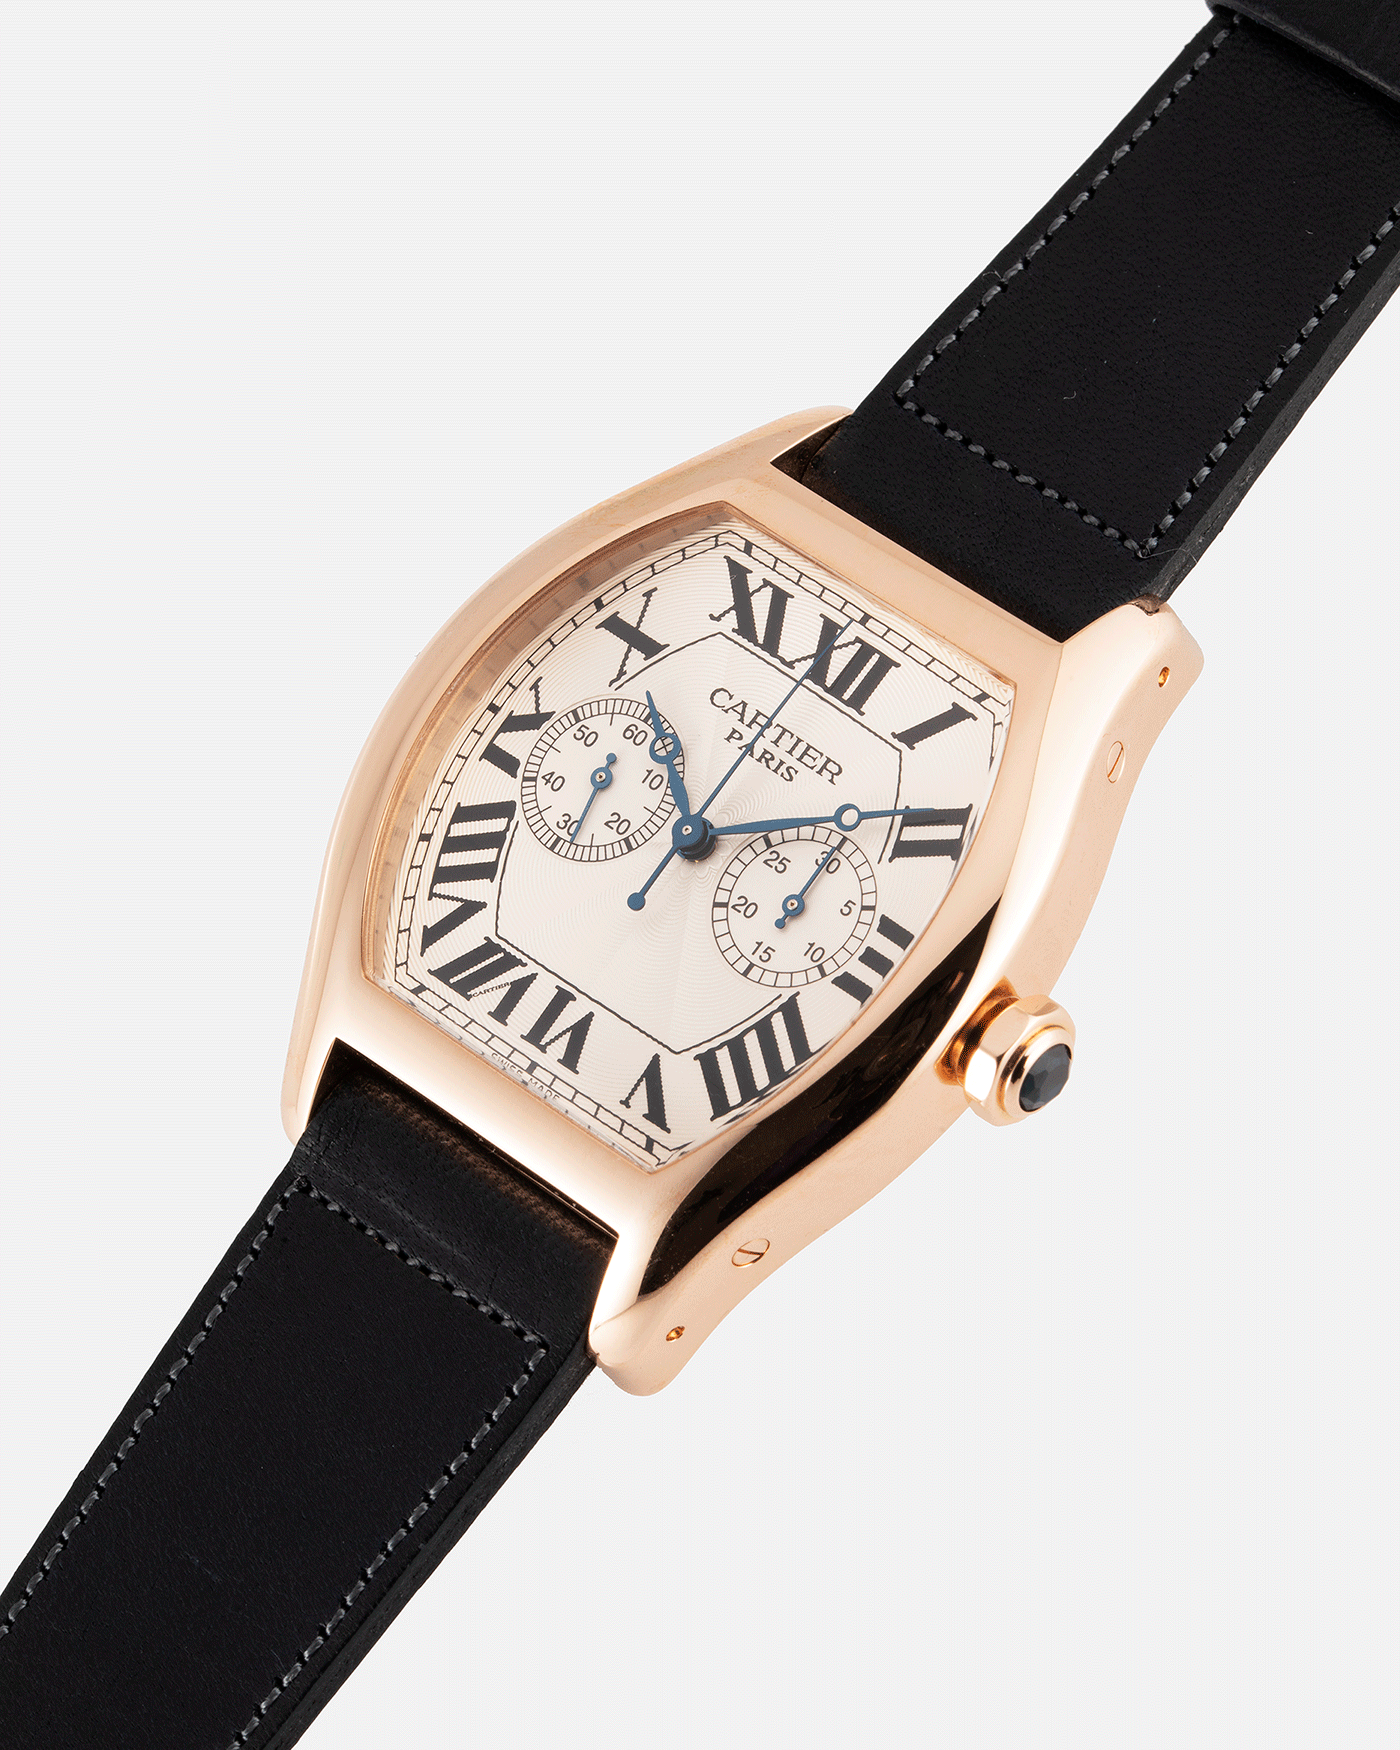 Brand: Cartier Year: 2005 Model: CPCP Collection Prive Tortue Monopoussoir XL Reference: 2781 Material: 18k Rose Gold Movement: THA Cal. 045MC Case Diameter: 37 x 39 mm Strap: Navy Blue Accurate Form Japanese Calf Strap with separate 18k Cartier Rose Gold Deployant